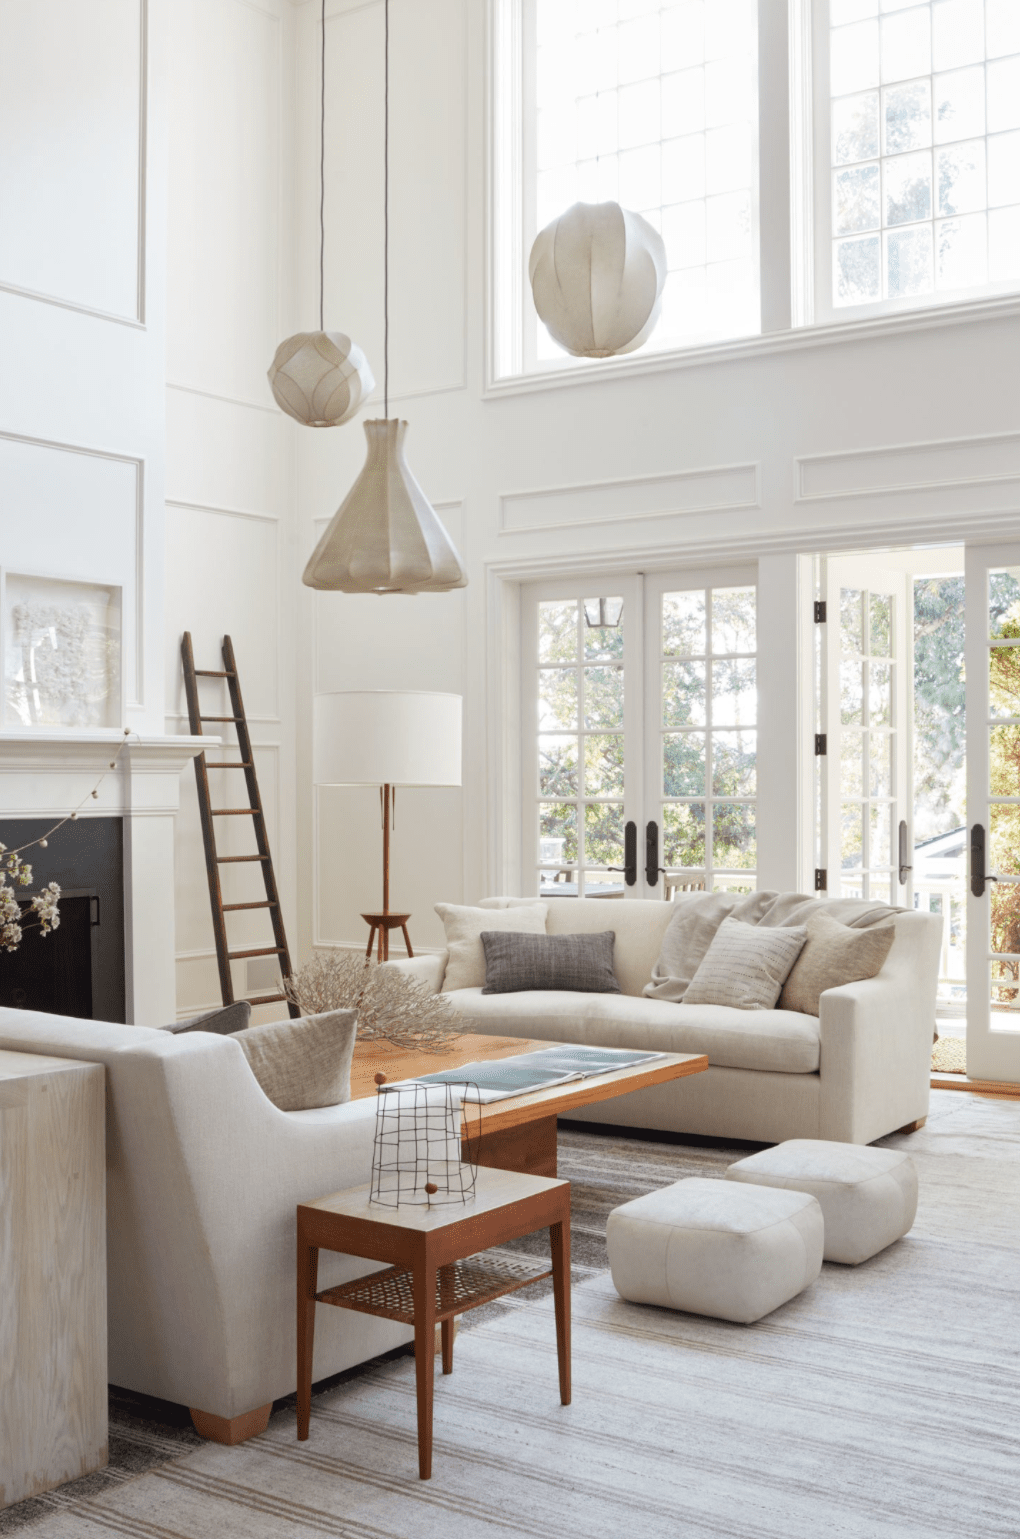 decor modern farmhouse colonial living trends trend interior forecast digest architectural via cocokelley